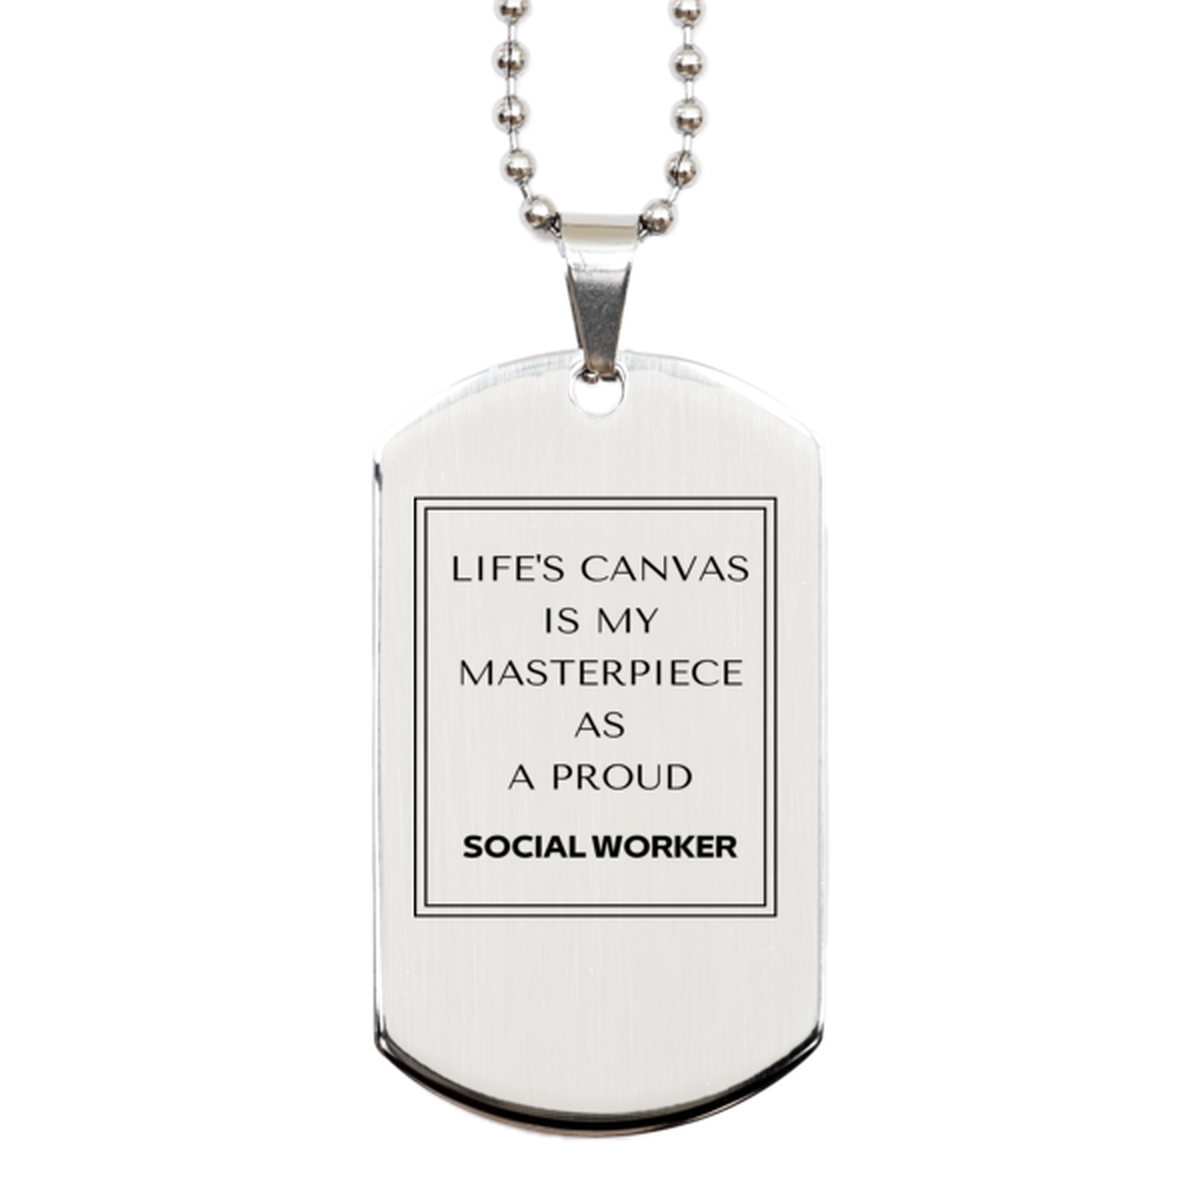 Proud Social Worker Gifts, Life's canvas is my masterpiece, Epic Birthday Christmas Unique Silver Dog Tag For Social Worker, Coworkers, Men, Women, Friends